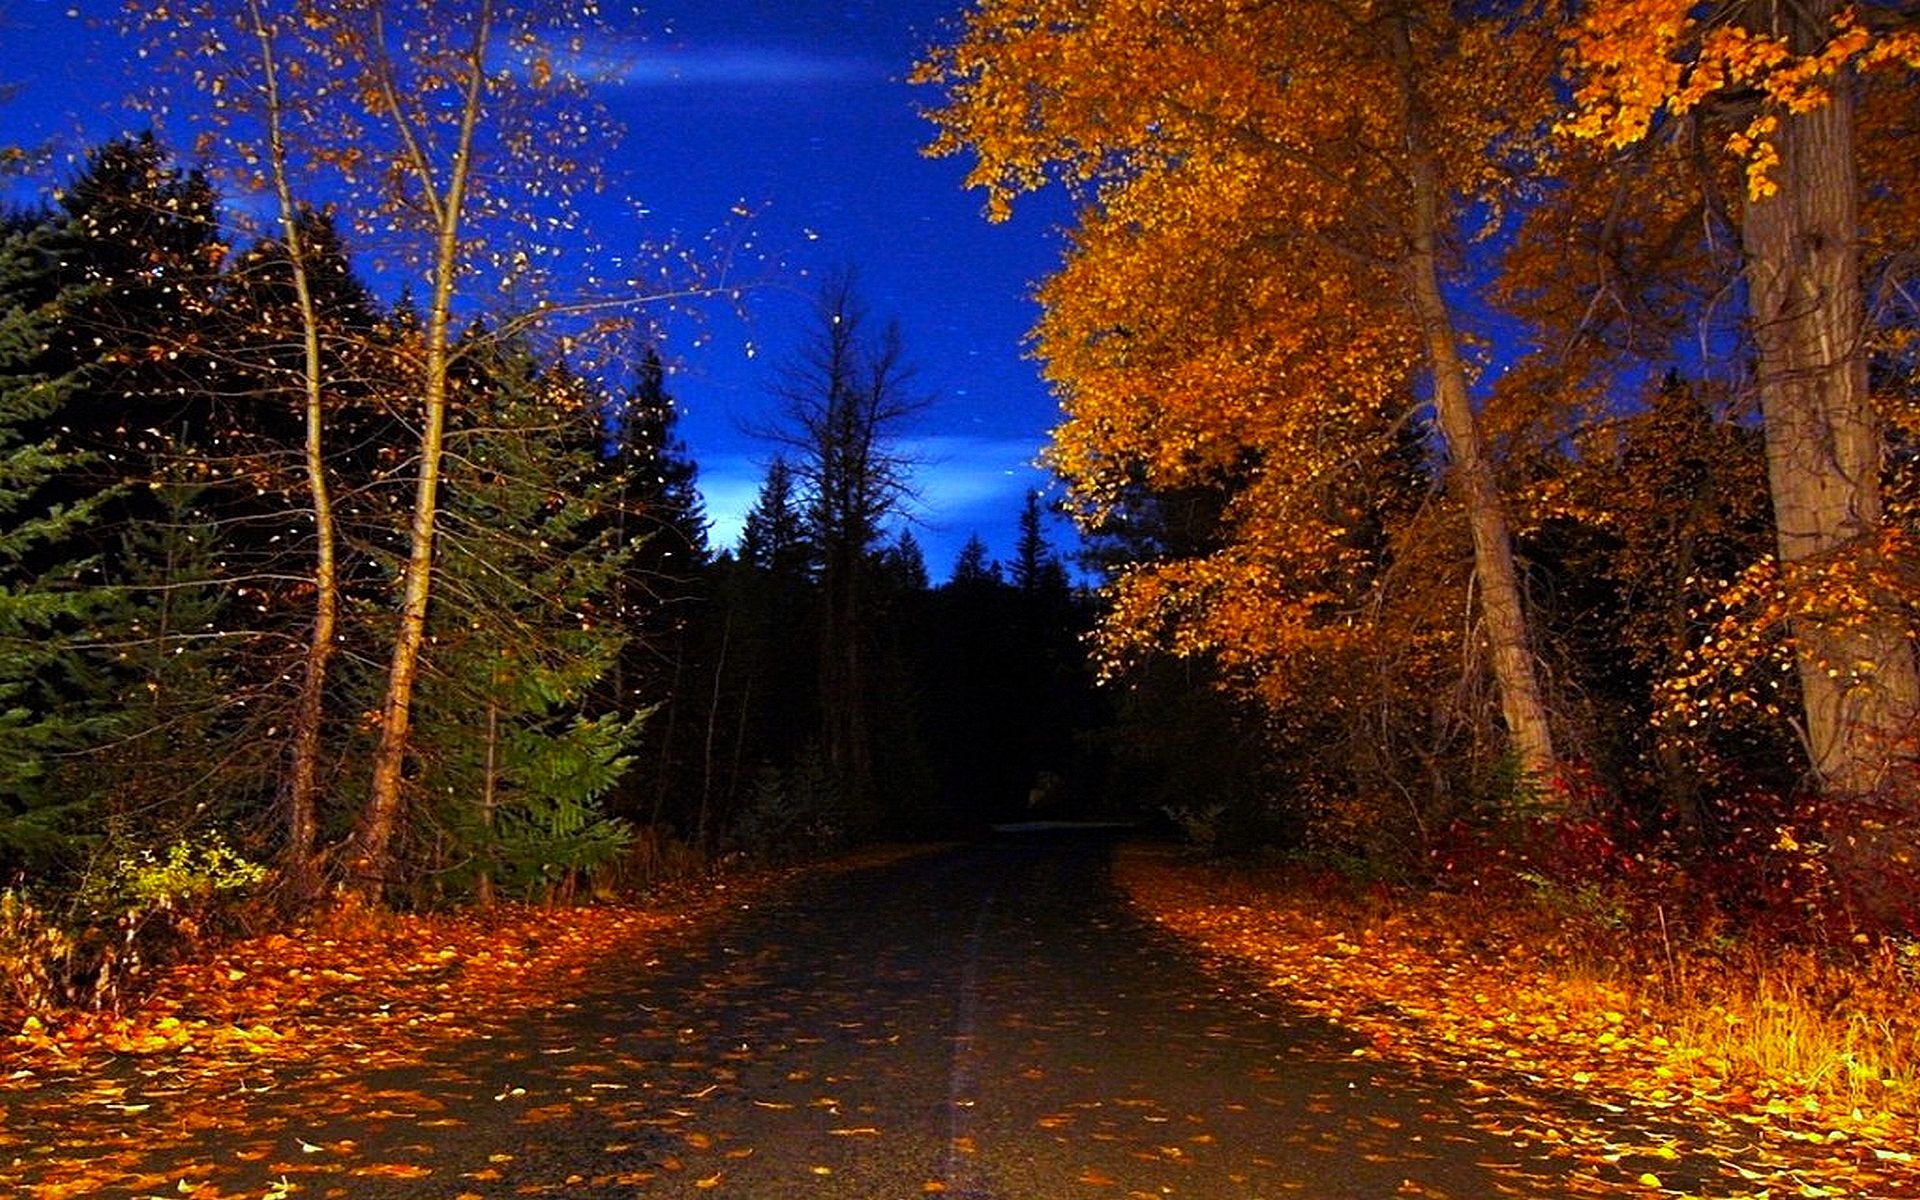 COUNTRY ROAD AUTUMN BLUE SKY COUNTRY FALL NIGHT OLD ROAD STARS